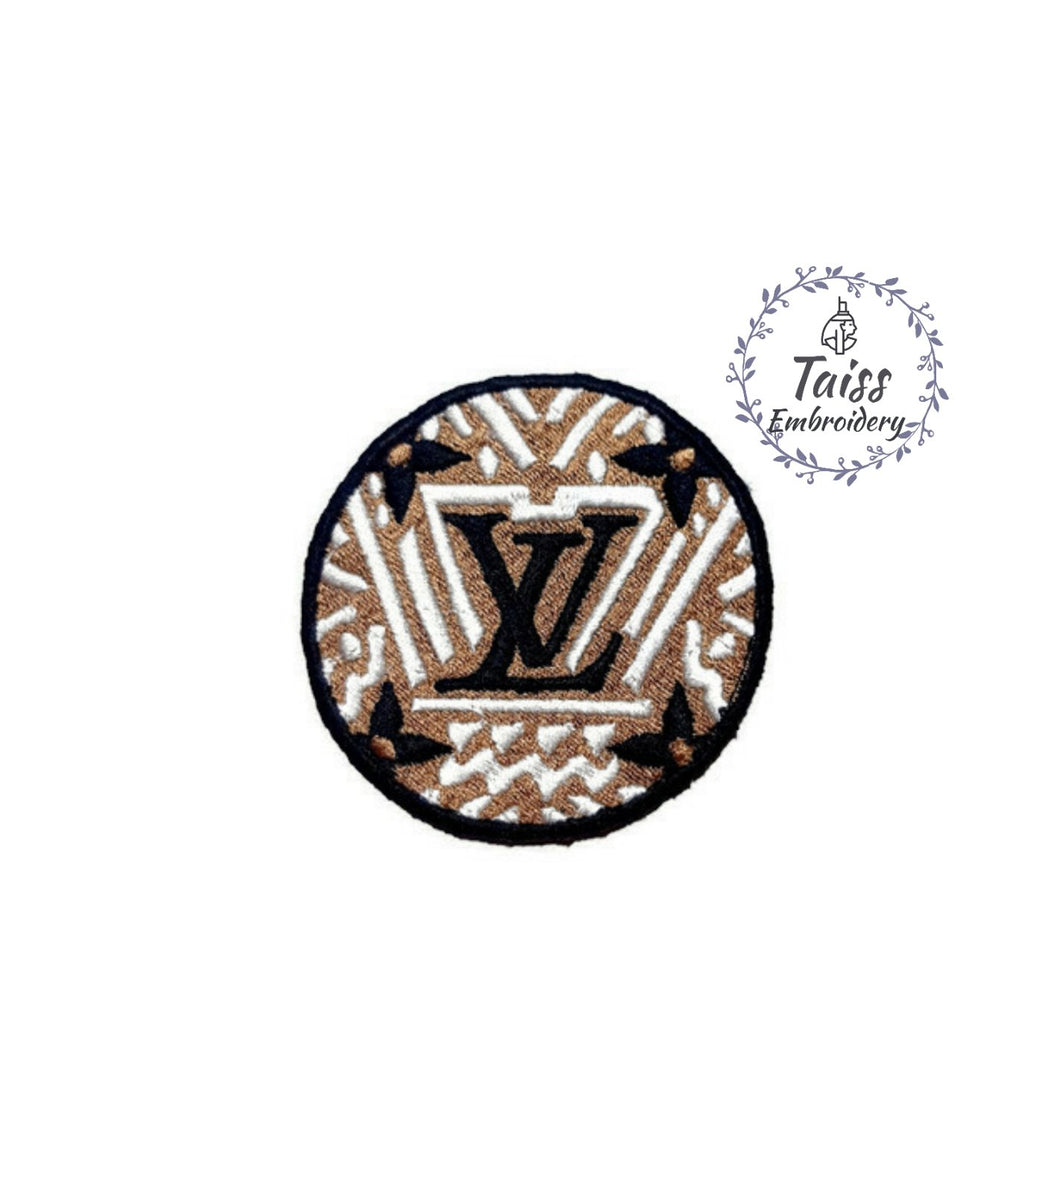 LV patch, embroidered iron on patch – Embroidery Taiss